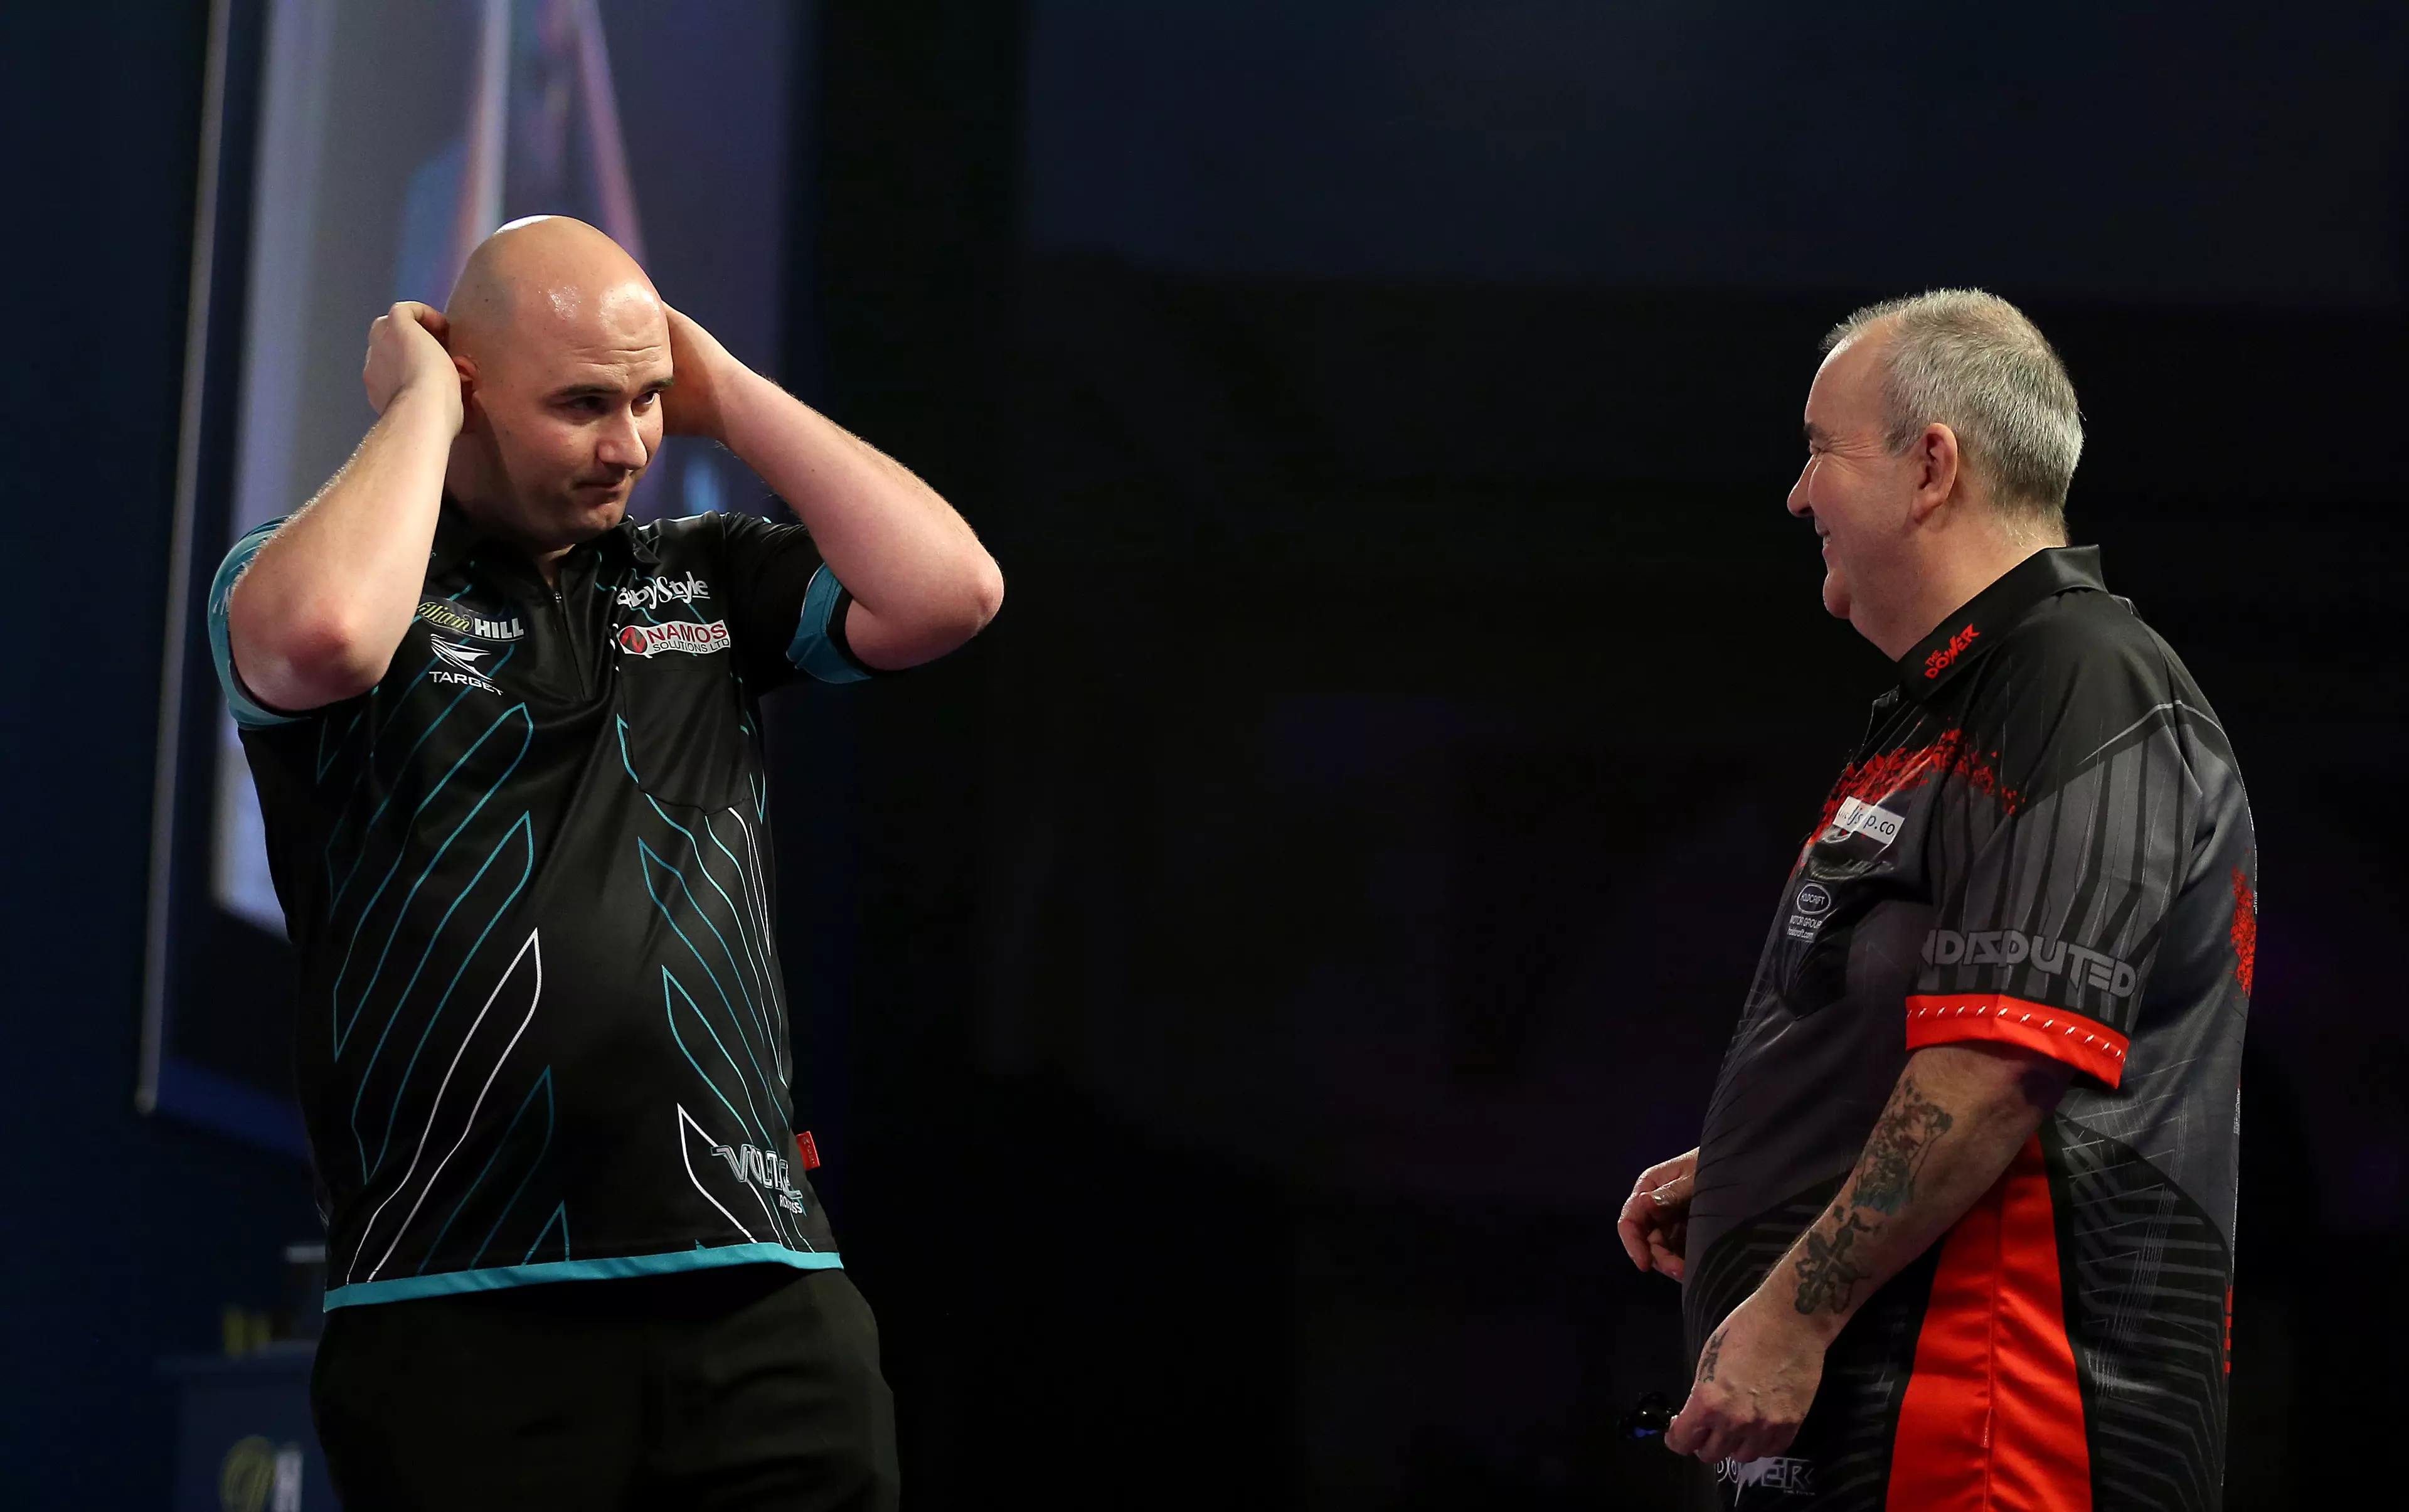 Rob Cross can't believe beating Taylor in the 'Power's' final ever match. Image: PA Images